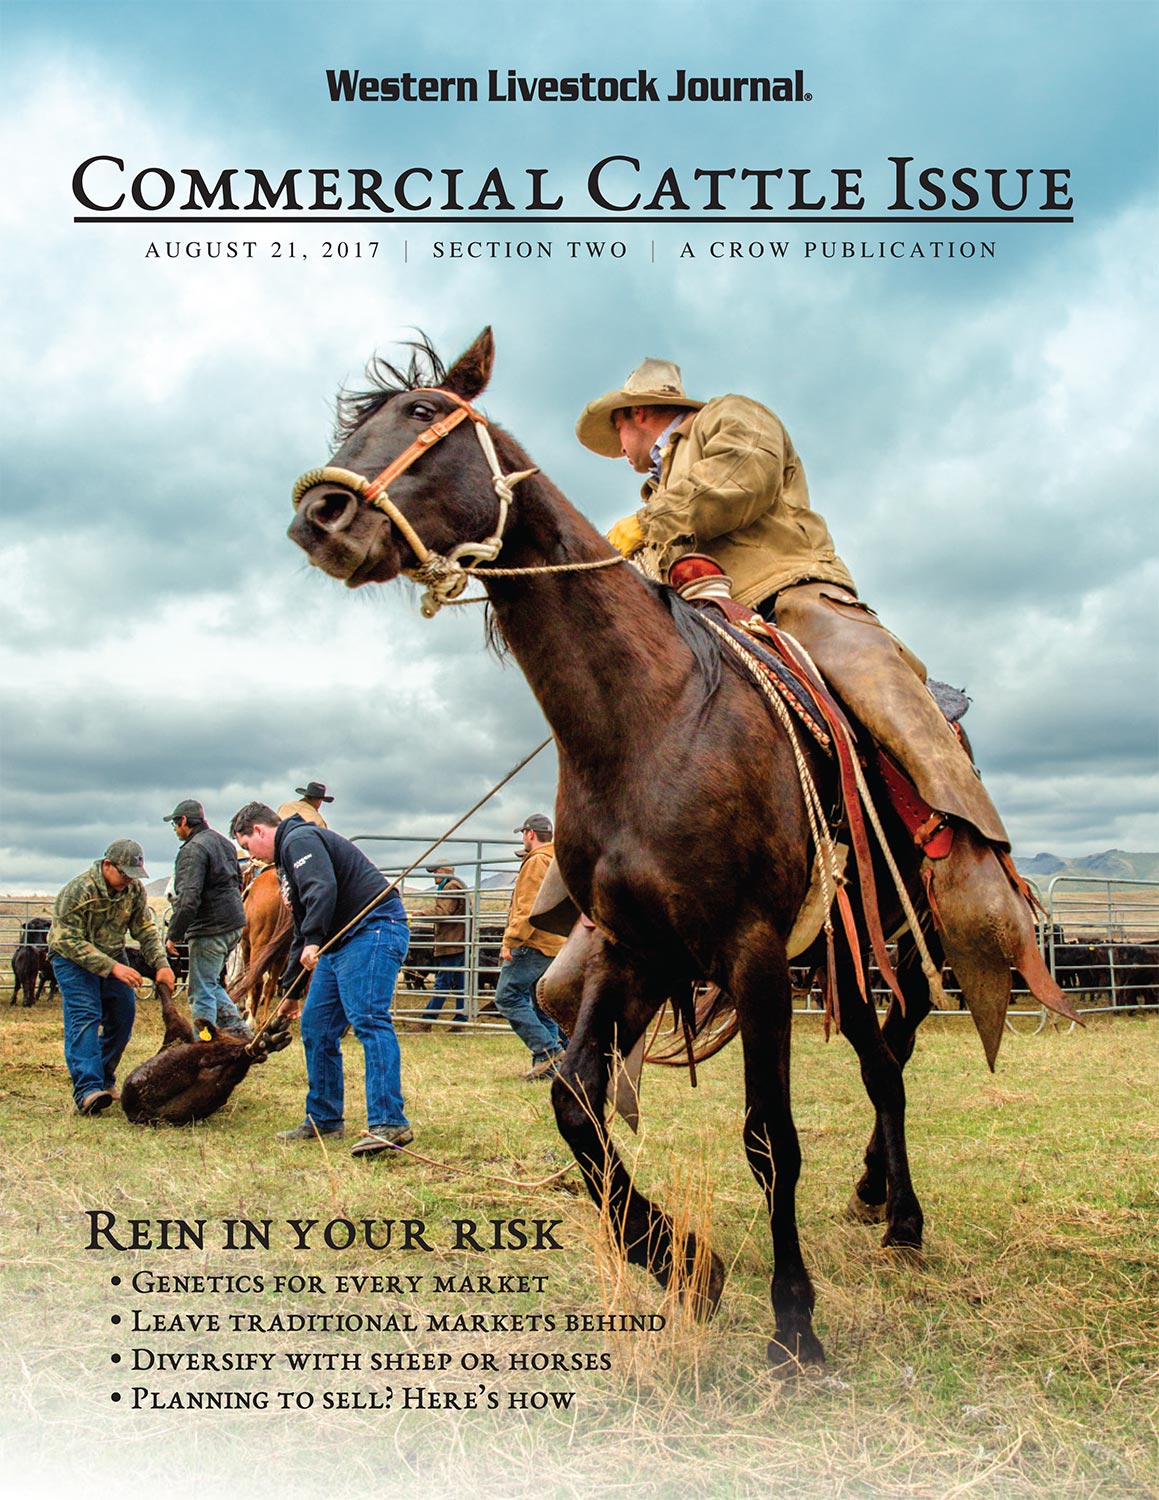 My ranching photos appear in Western Livestock Journal's Commercial Cattle Issue